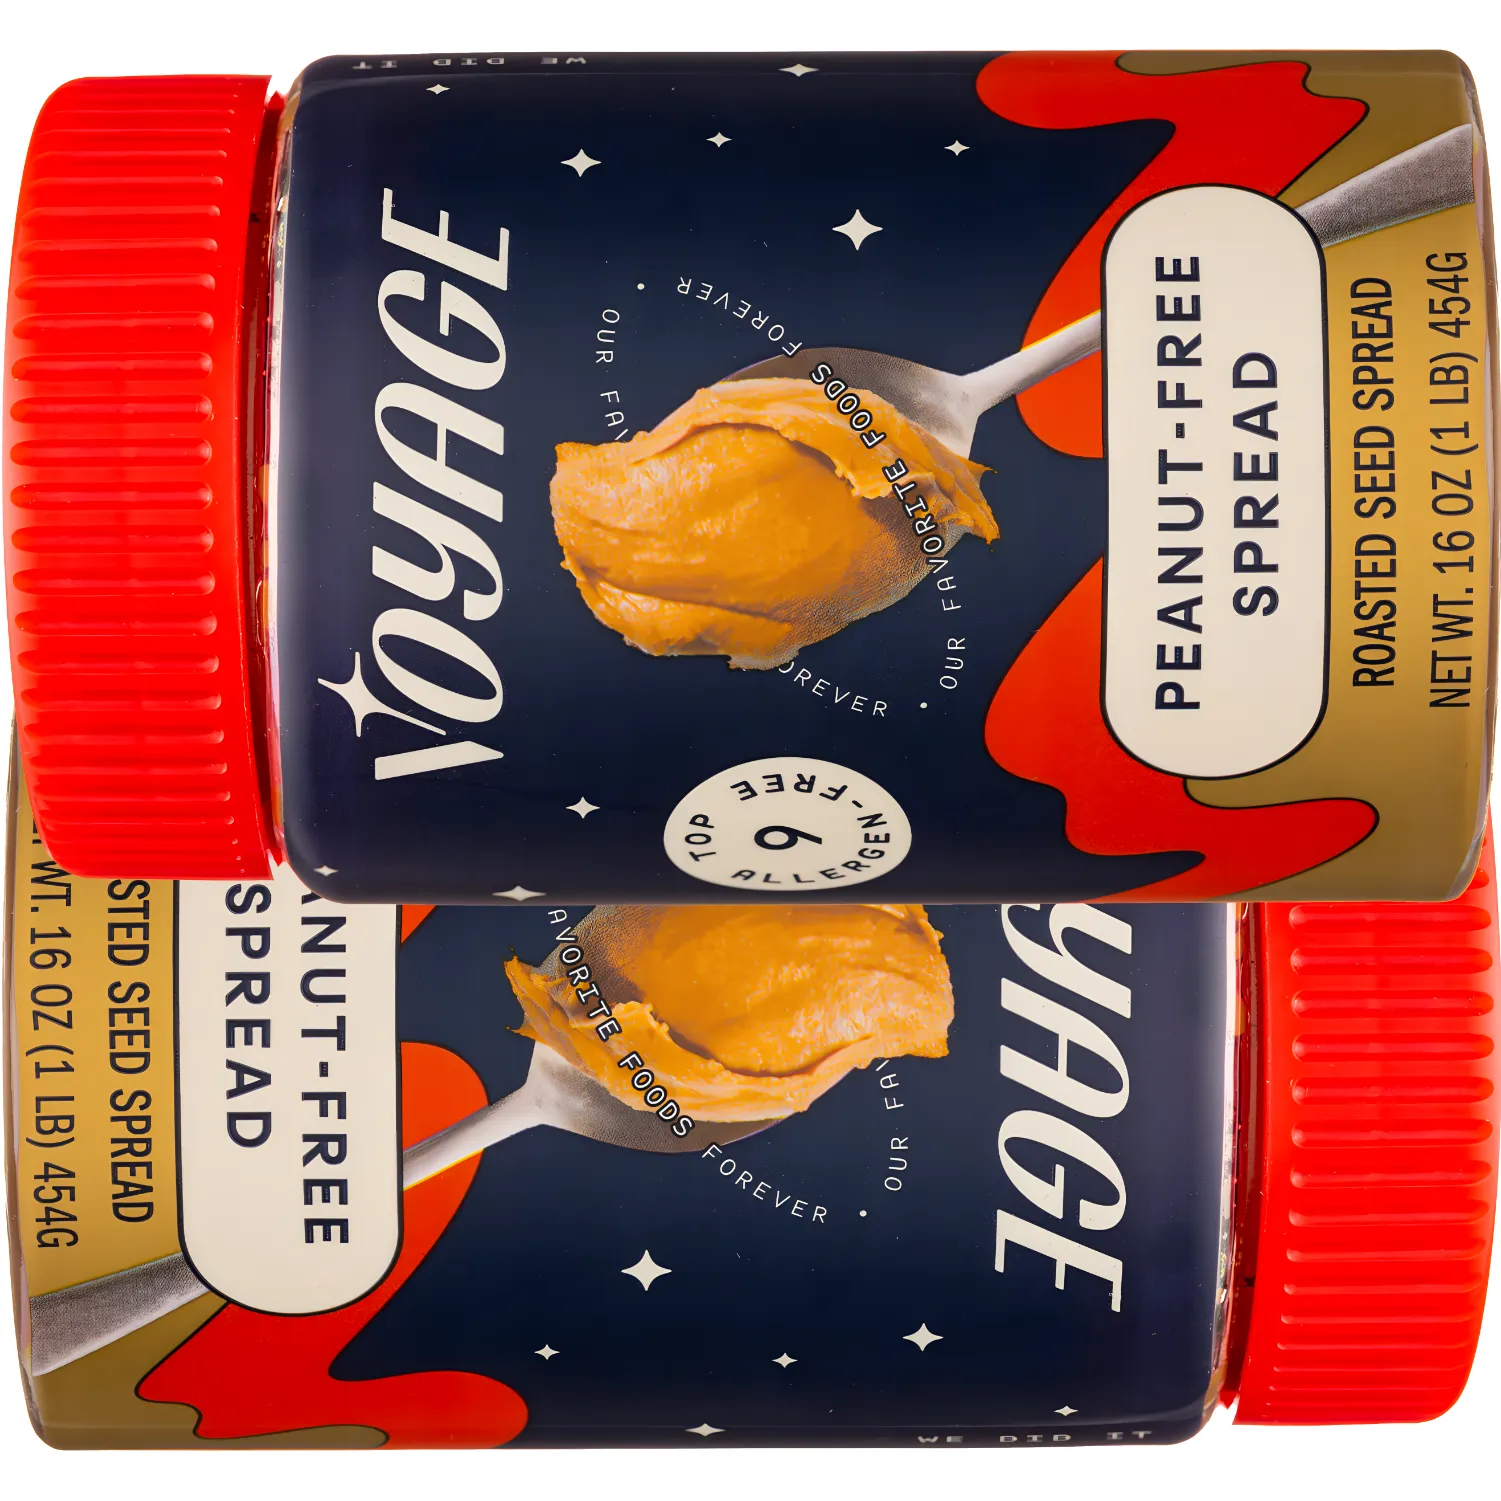 Free Voyage Foods Nut-Free Seed Spreads